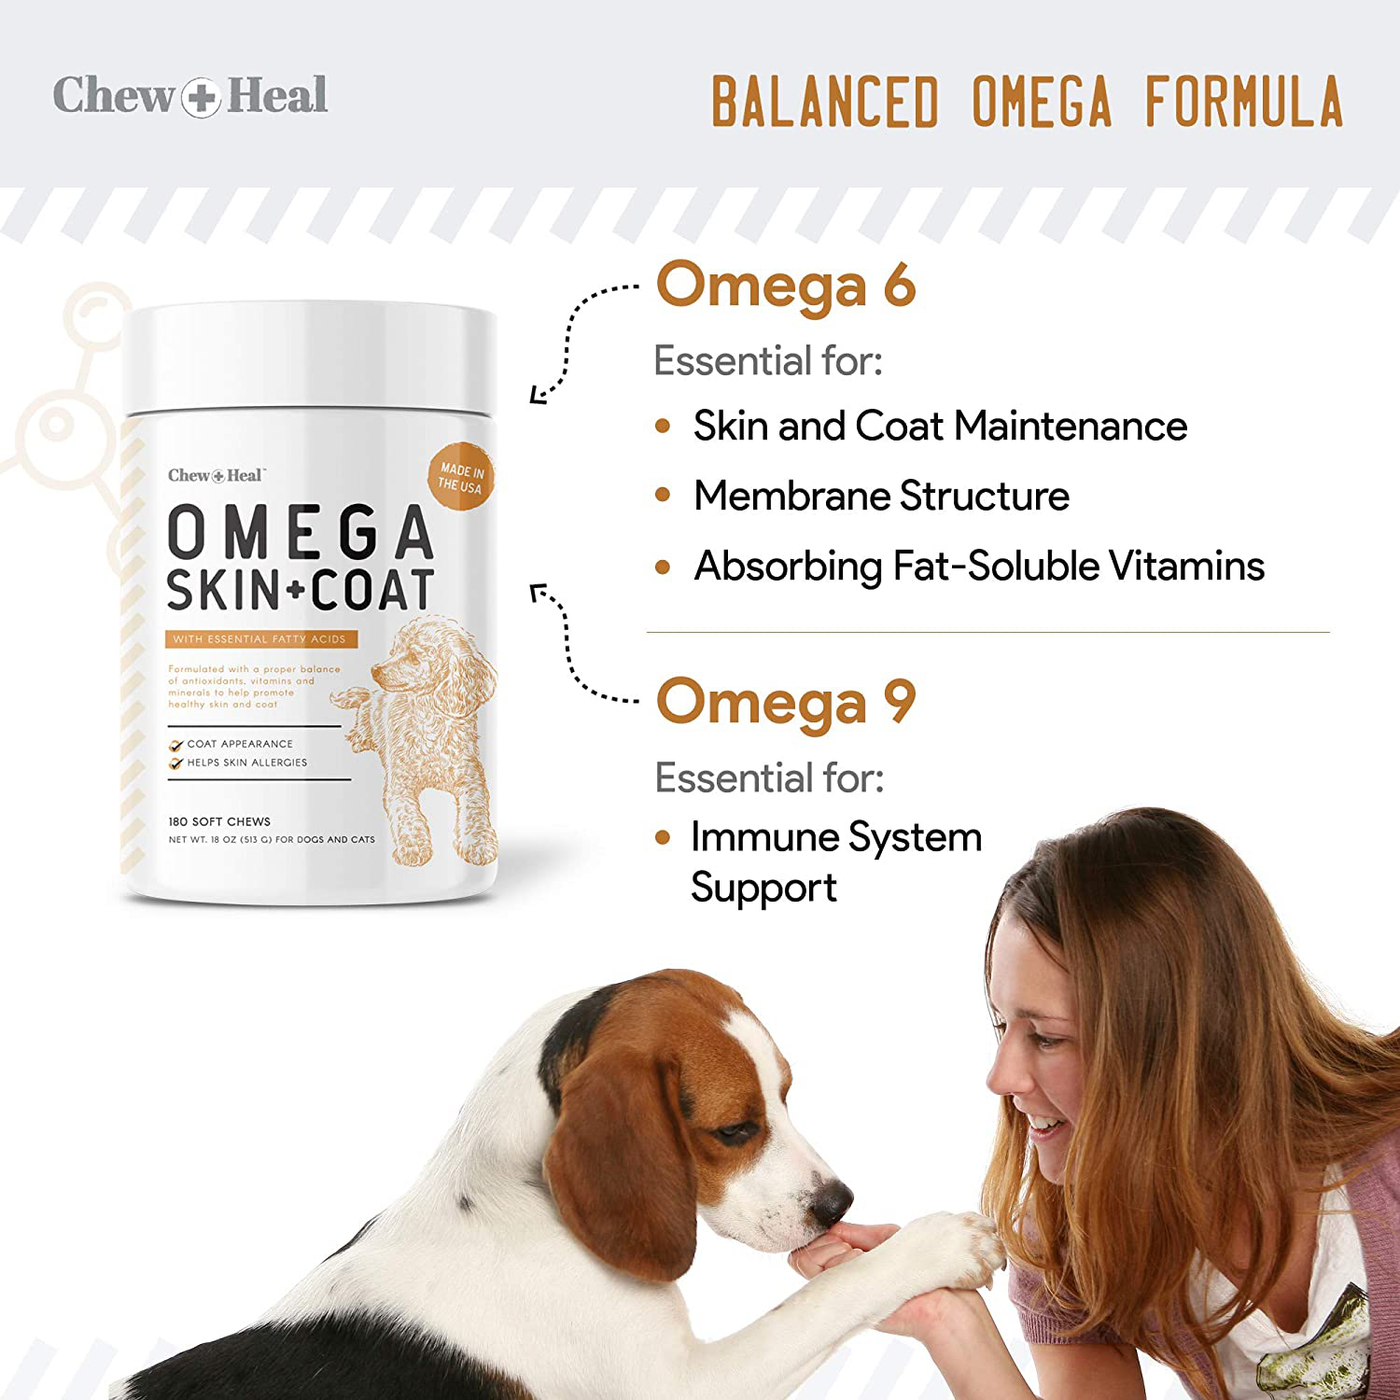 180 Soft Chew Omega Treats for Skin and Coat - Fish Oil Blend of Essential Fatty Acids, Omega 3, 6, and 9, Vitamins, Antioxidants and Minerals